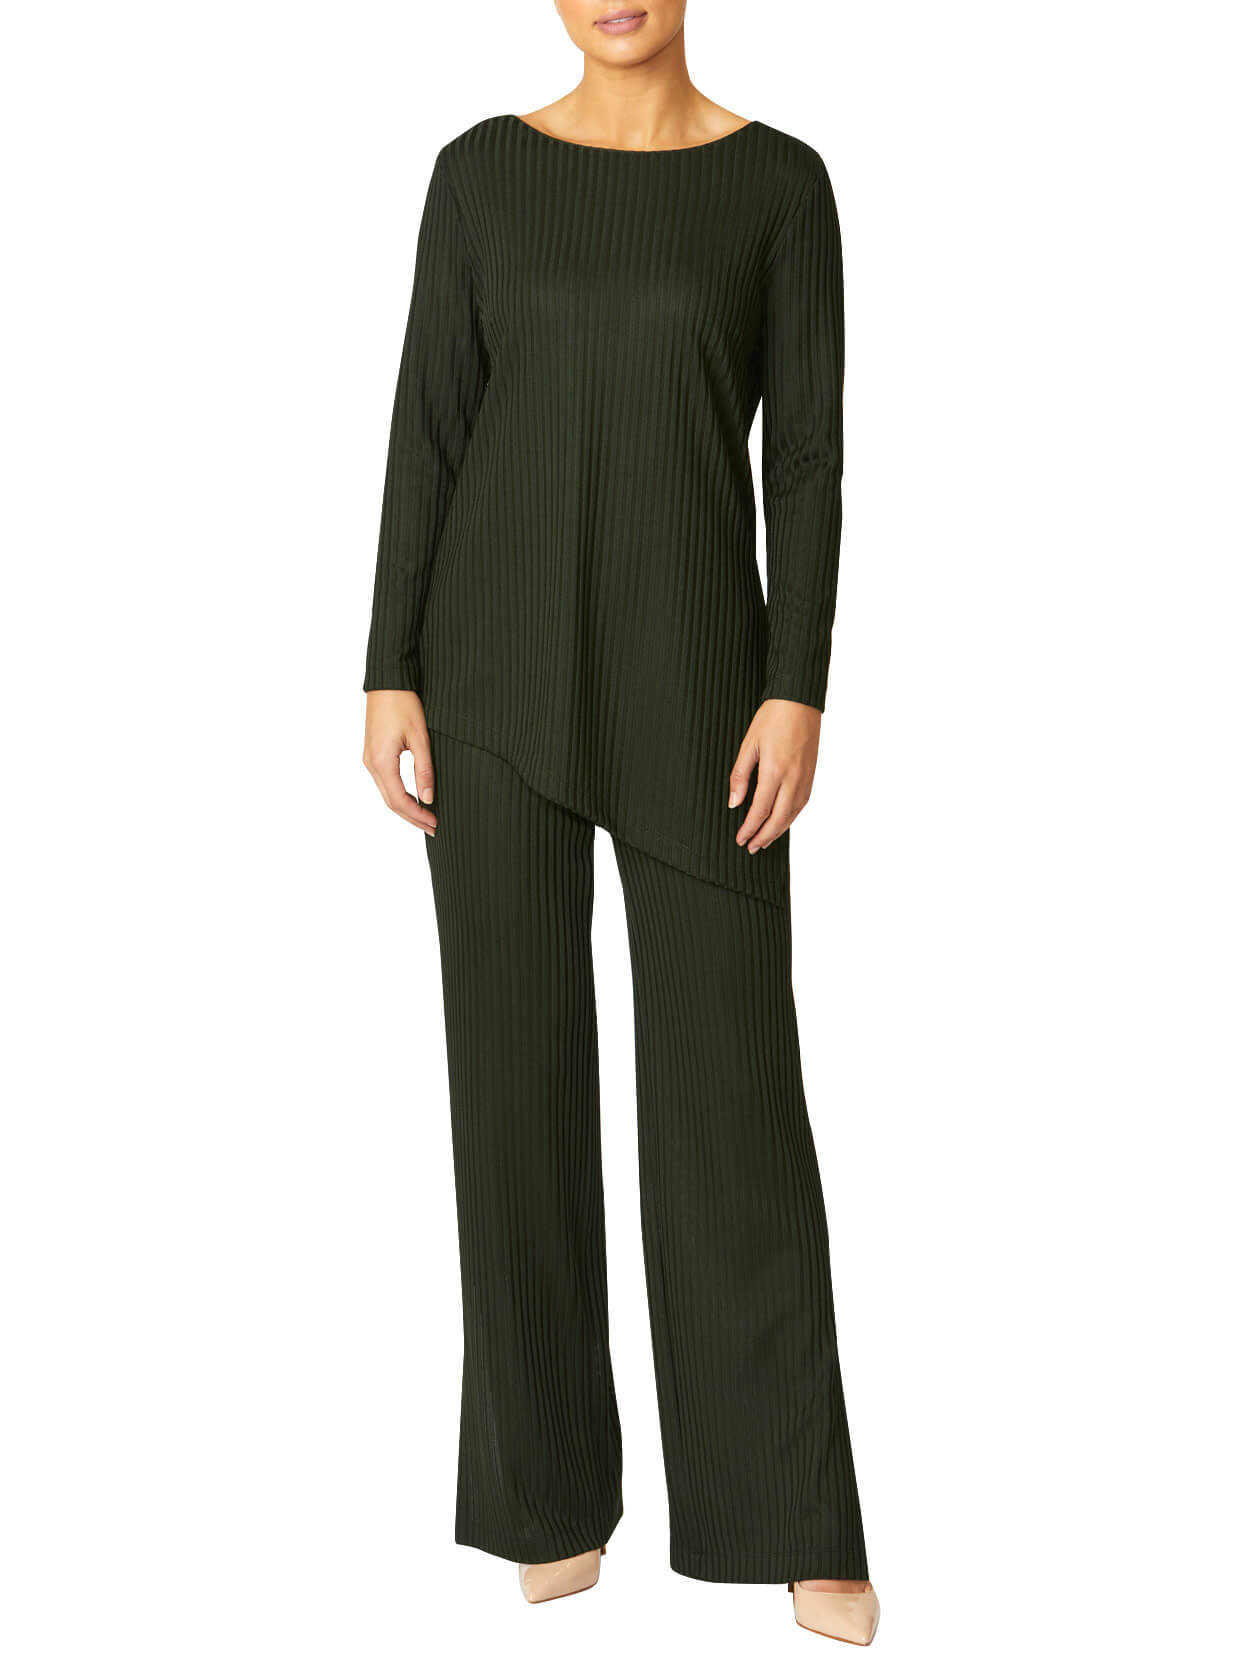 Carrie Olive Pant